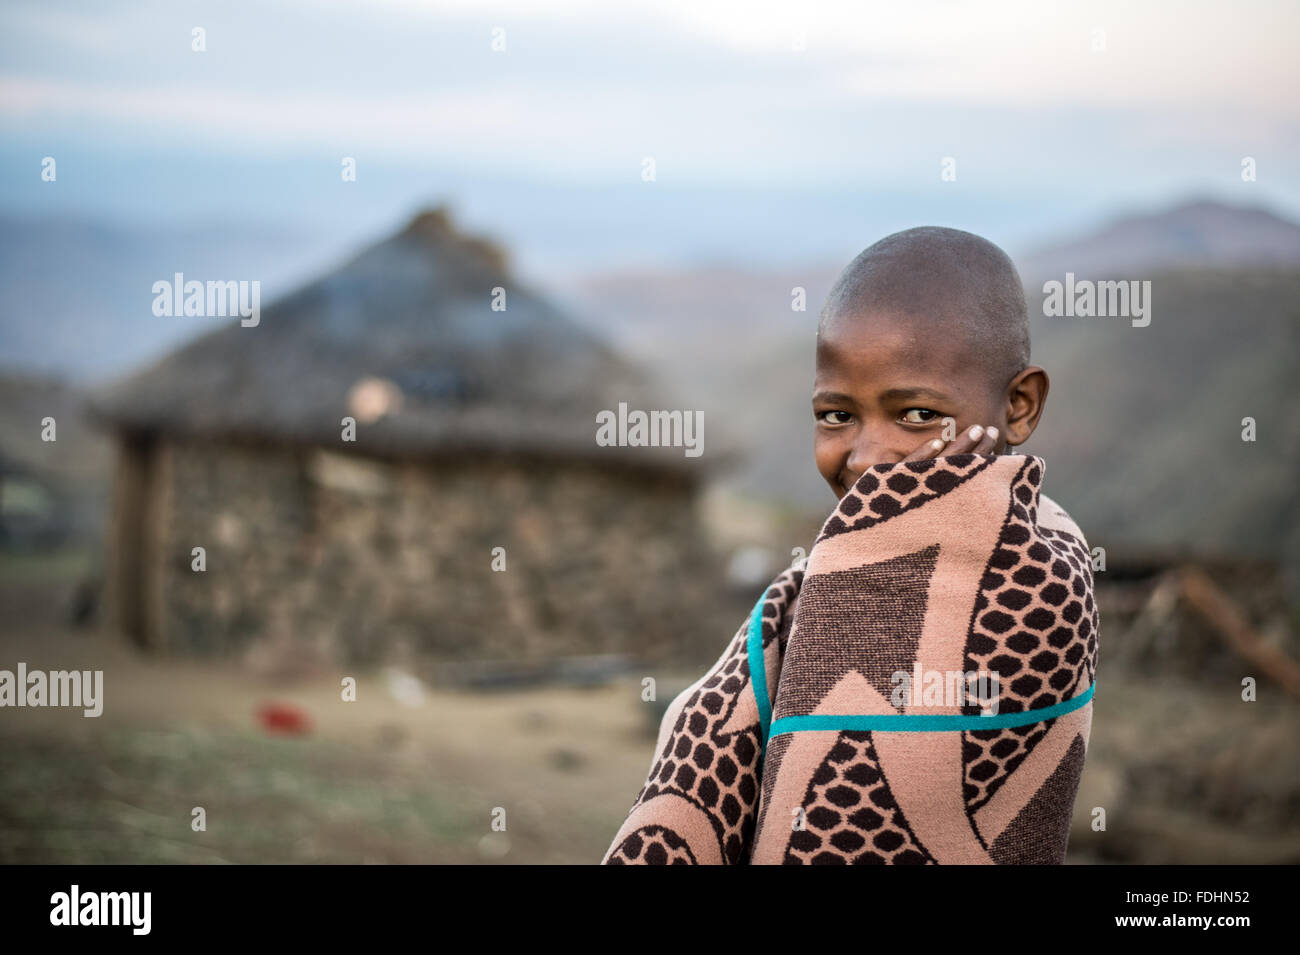 Young boy wrapped in a blanket standing in front of a stone hut in Lesotho, Africa Stock Photo